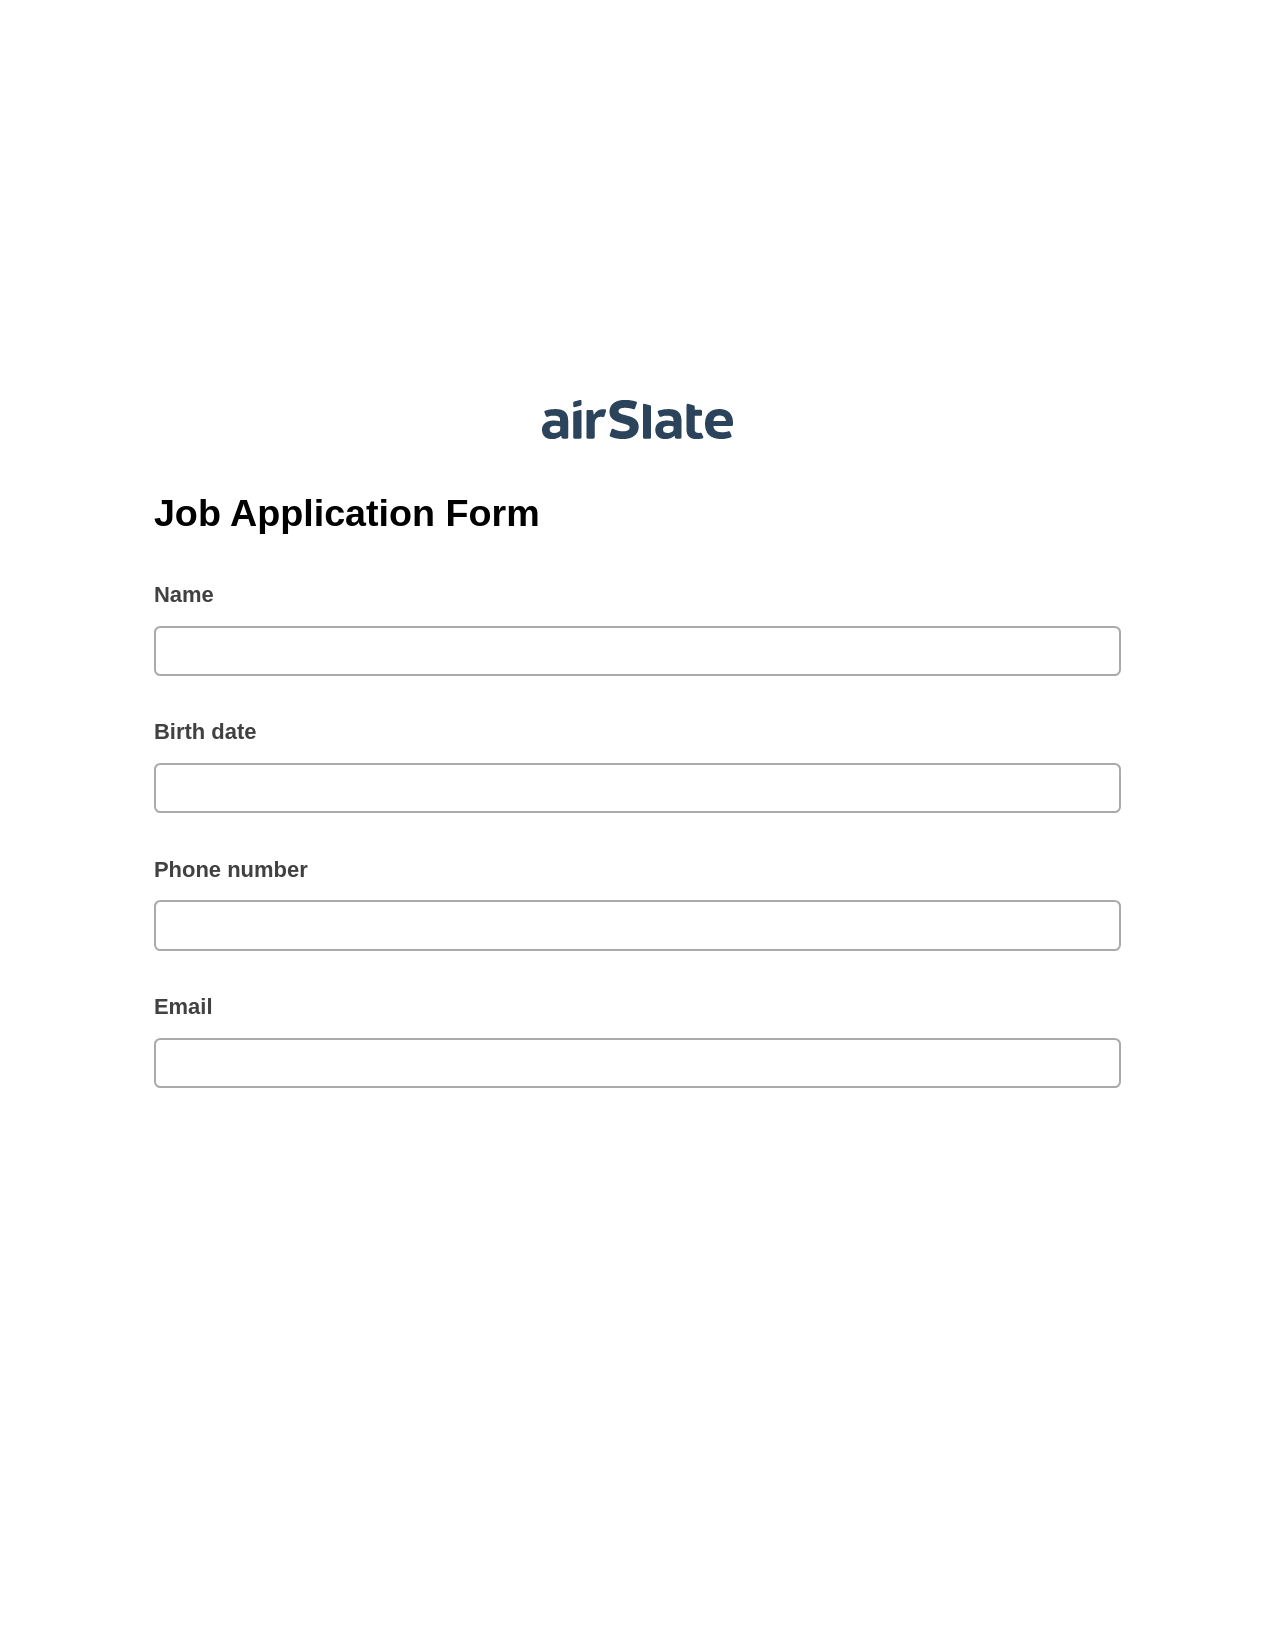 Multirole Job Application Form Pre-fill Dropdowns from Office 365 Excel Bot, Create MS Dynamics 365 Records Bot, Export to Smartsheet